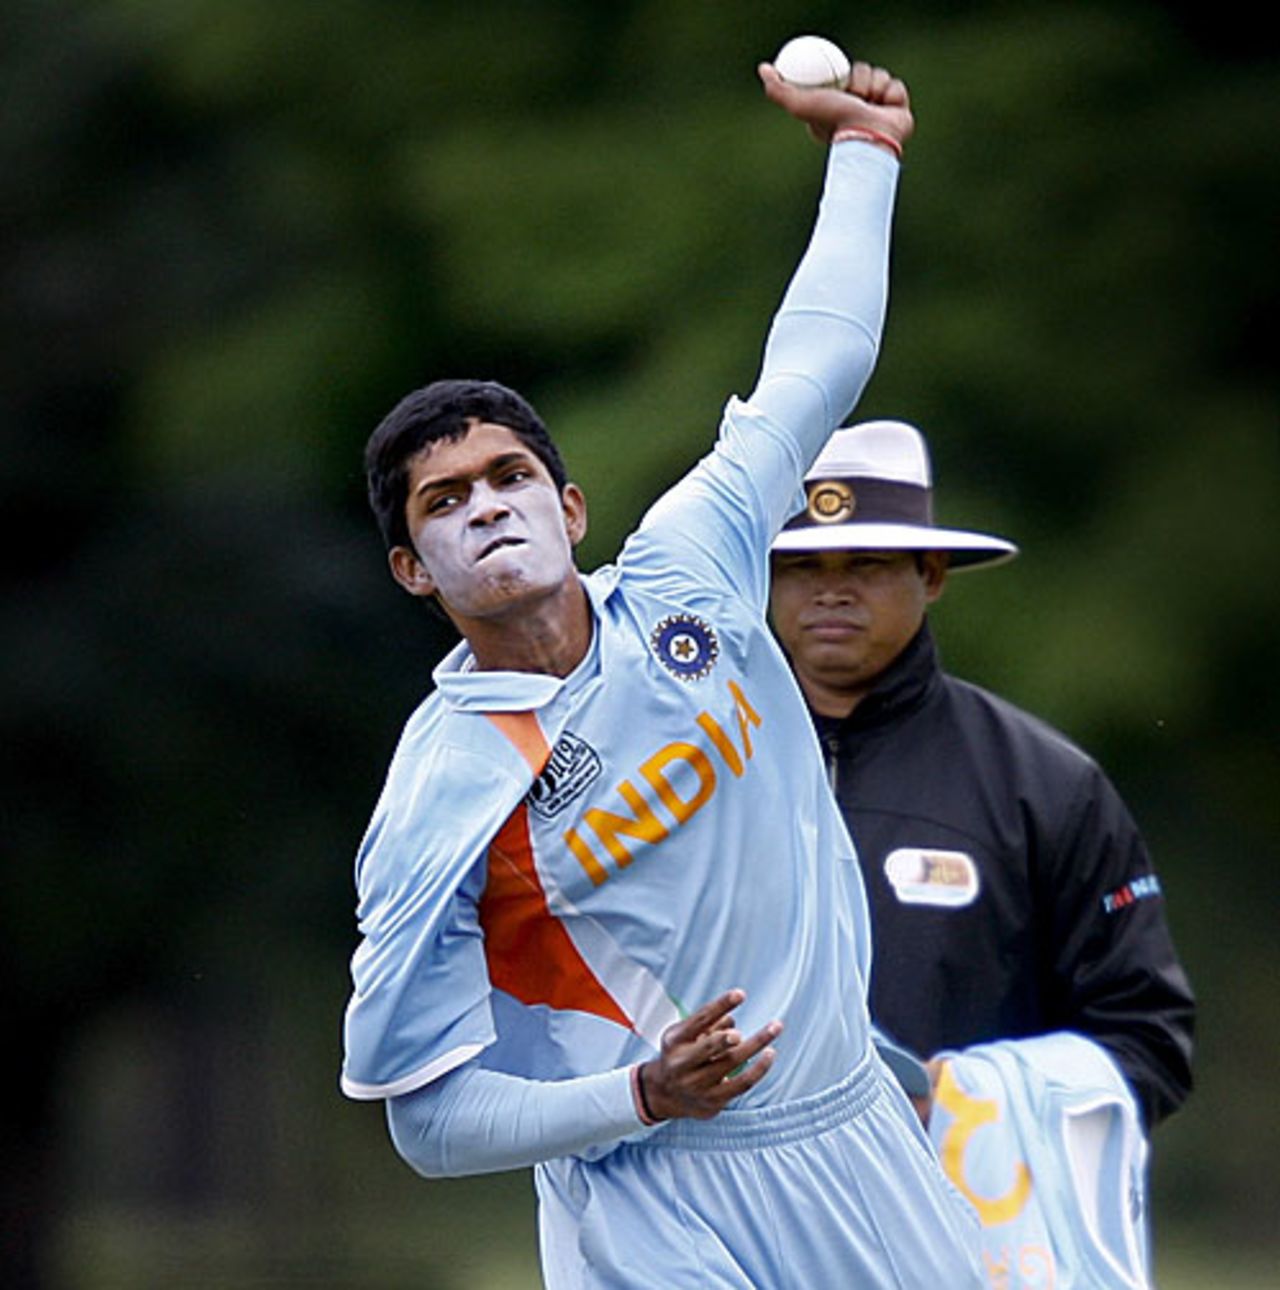 Gaurav Jathar took 3 for 27, India Under-19s v Hong Kong Under-19s, 11th Match, Group A, ICC Under-19 World Cup, Christchurch, January 17, 2010